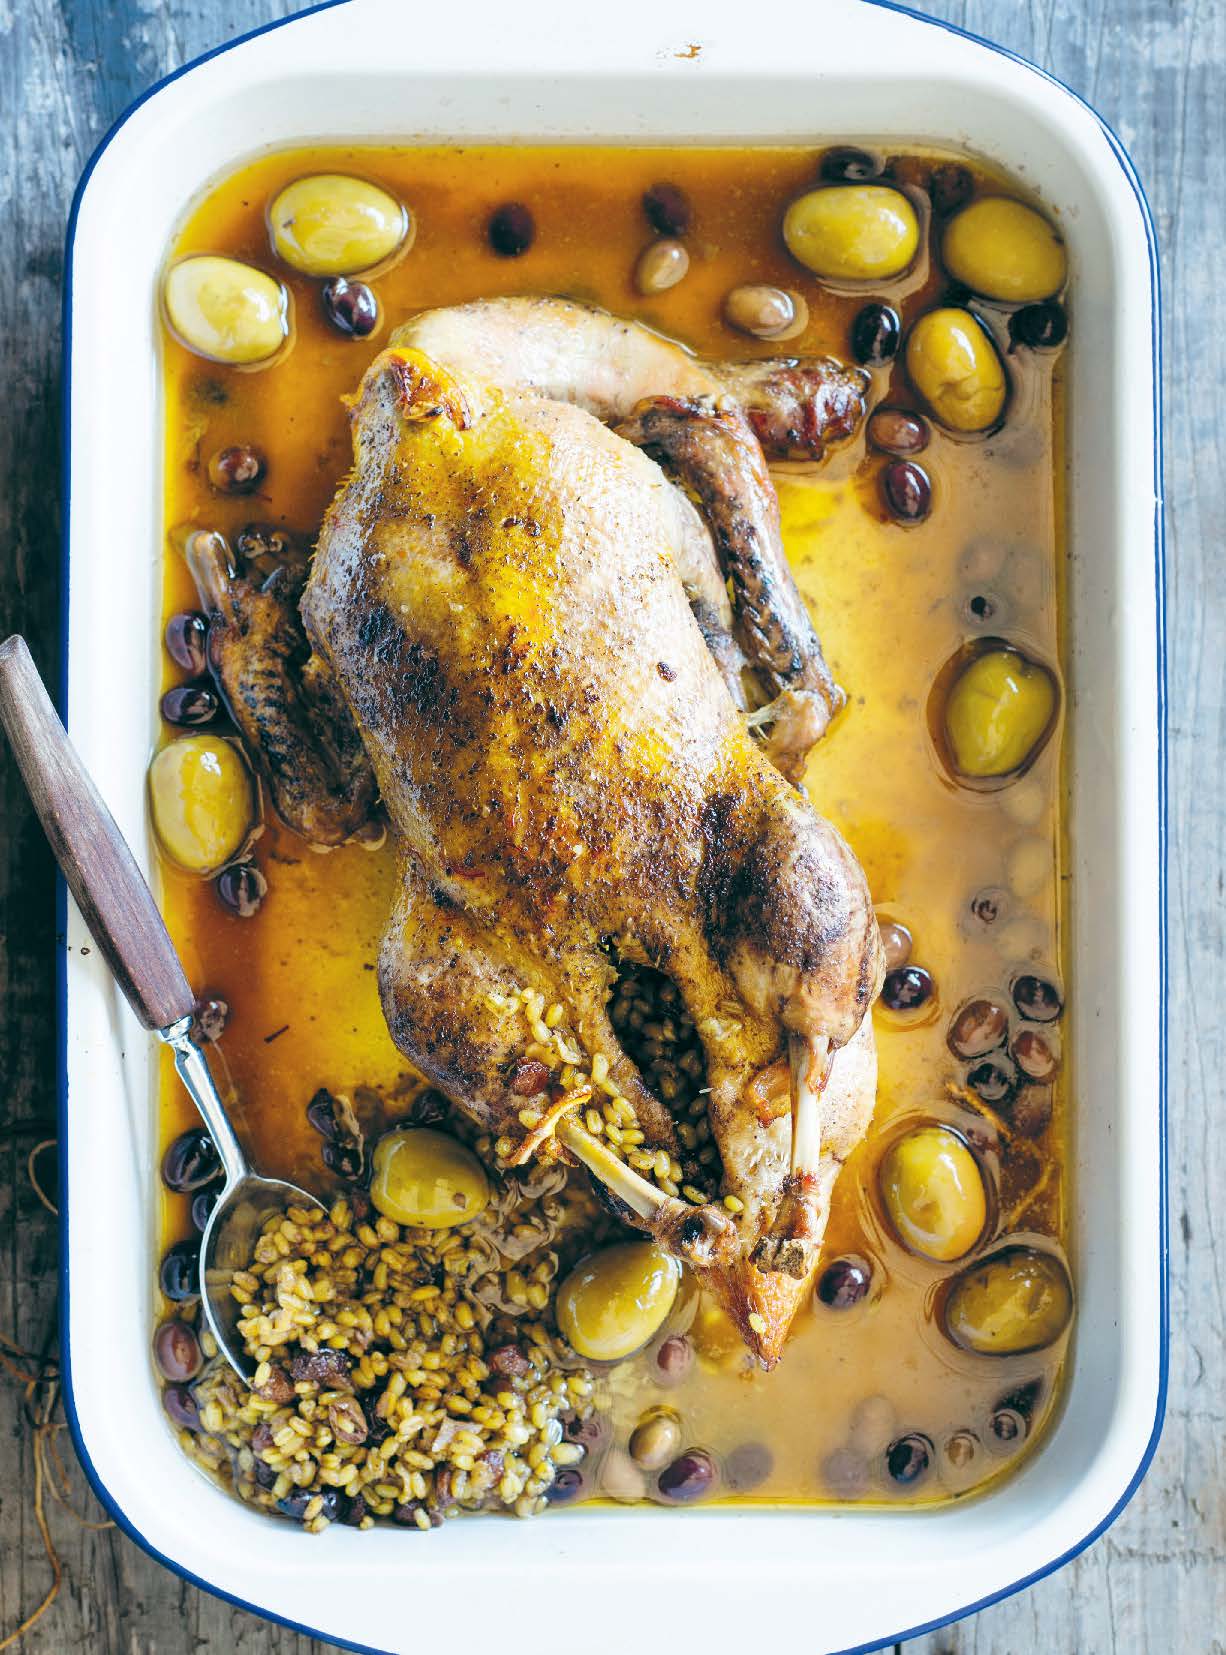 Freekeh-stuffed duck with saffron, olives and preserved lemon